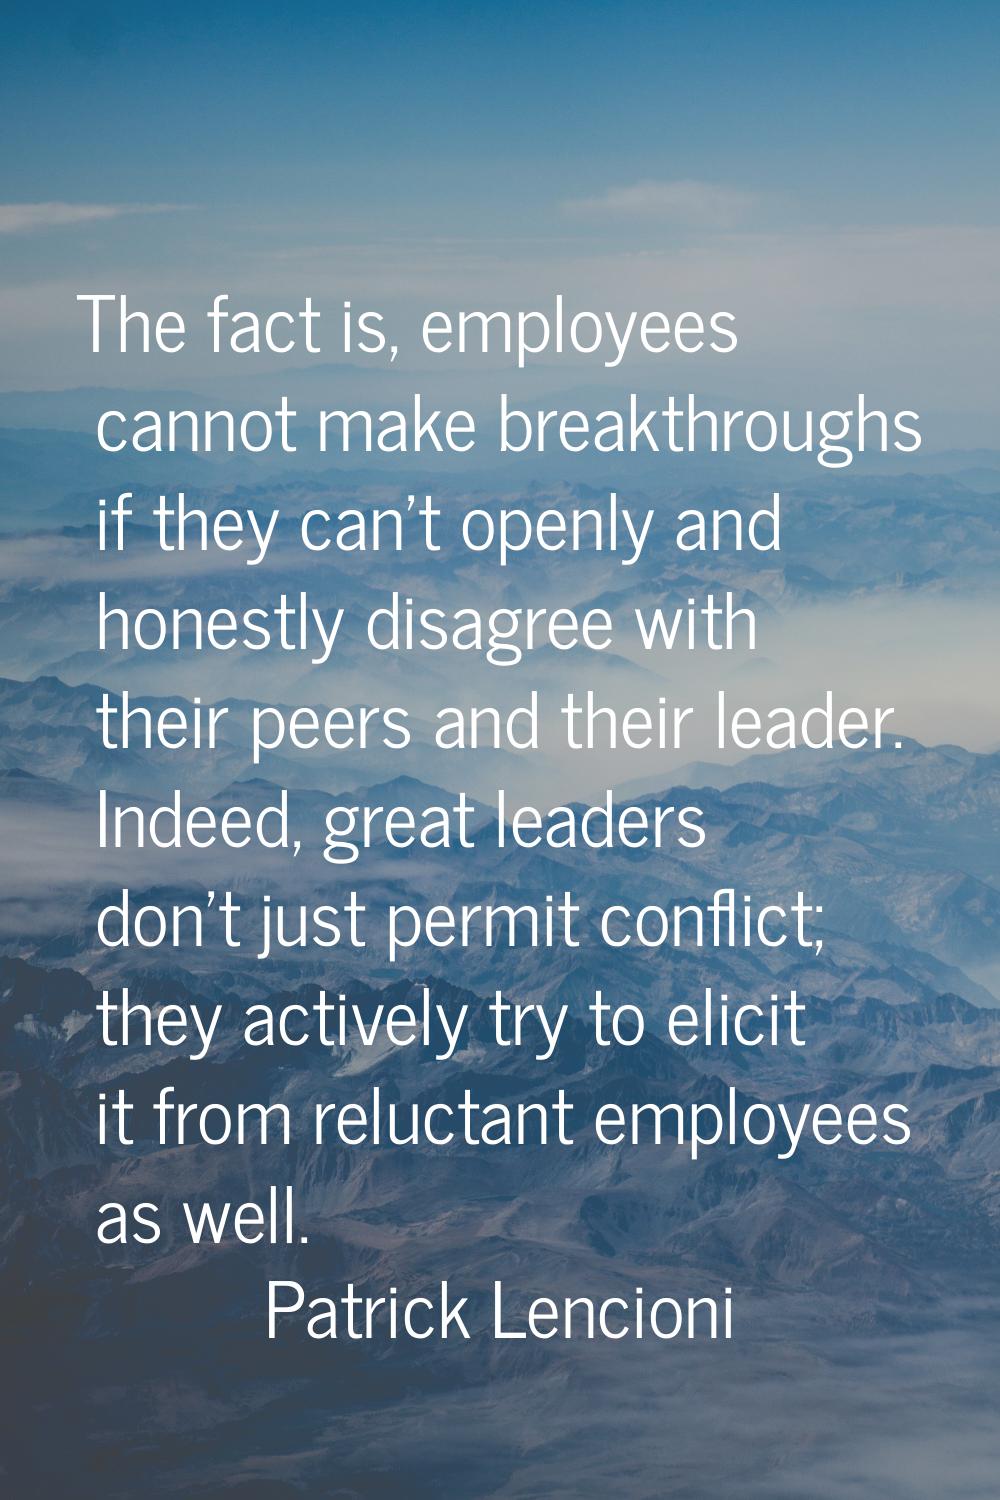 The fact is, employees cannot make breakthroughs if they can't openly and honestly disagree with th